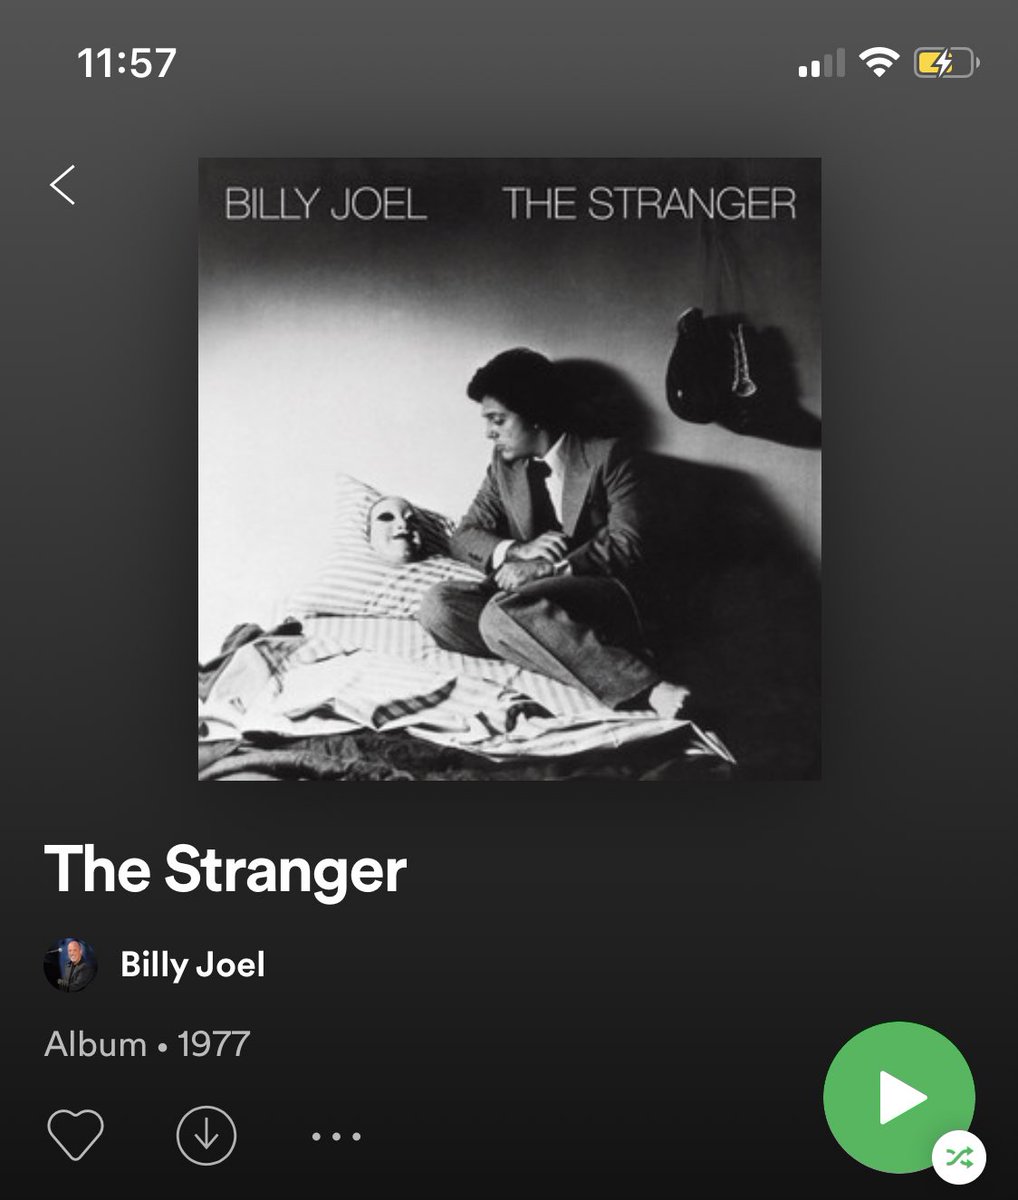 the stranger fav songs: vienna, she’s always a woman, scenes from an italian restaurant, only the good die youngi remember i bought this album on itunes with my ipod 4 in 6th grade